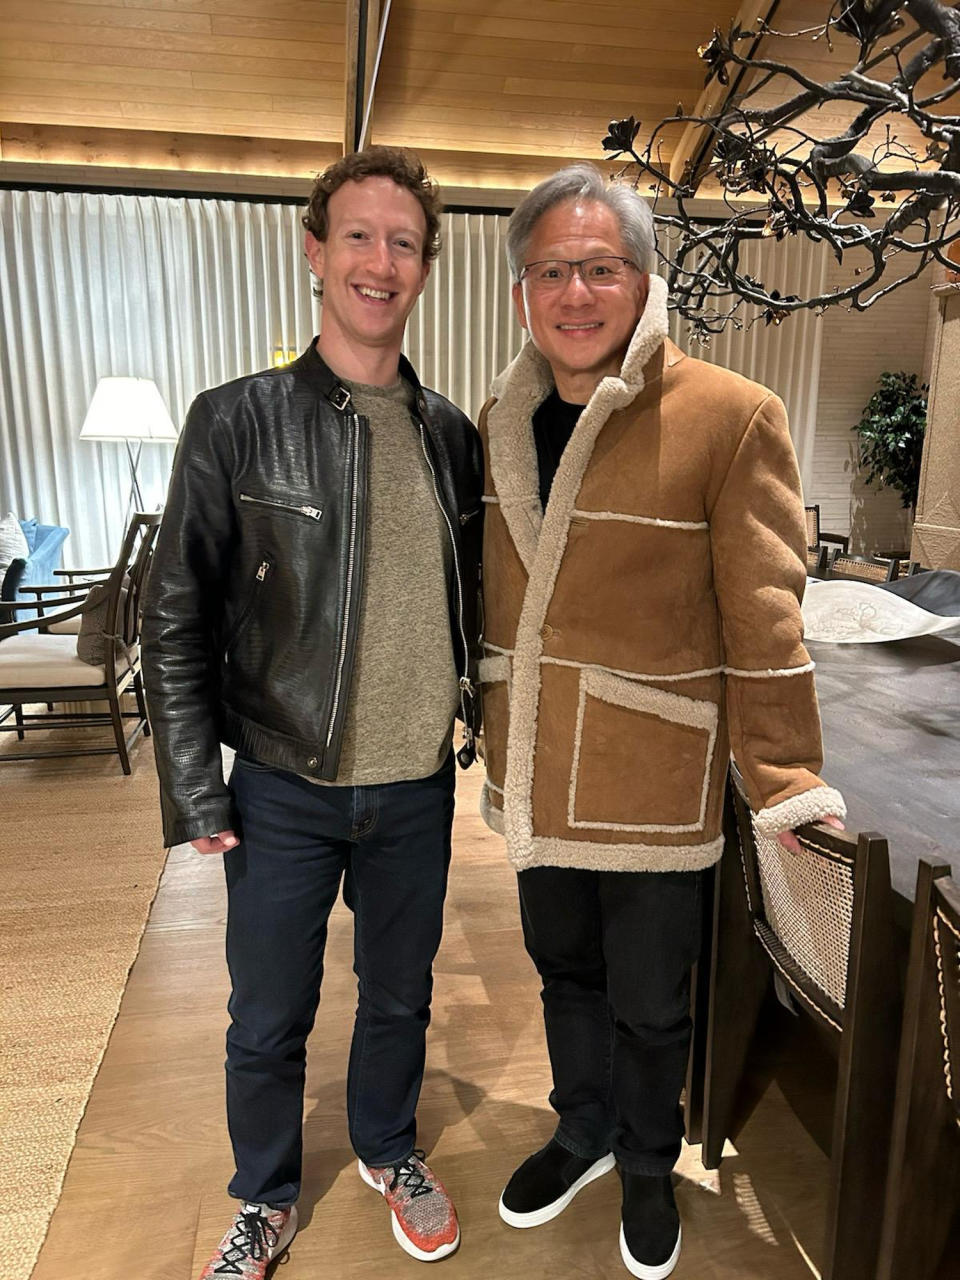 Meta's Mark Zuckerberg and Nvidia's Jensen Huang in a fashion-swap photo in March.